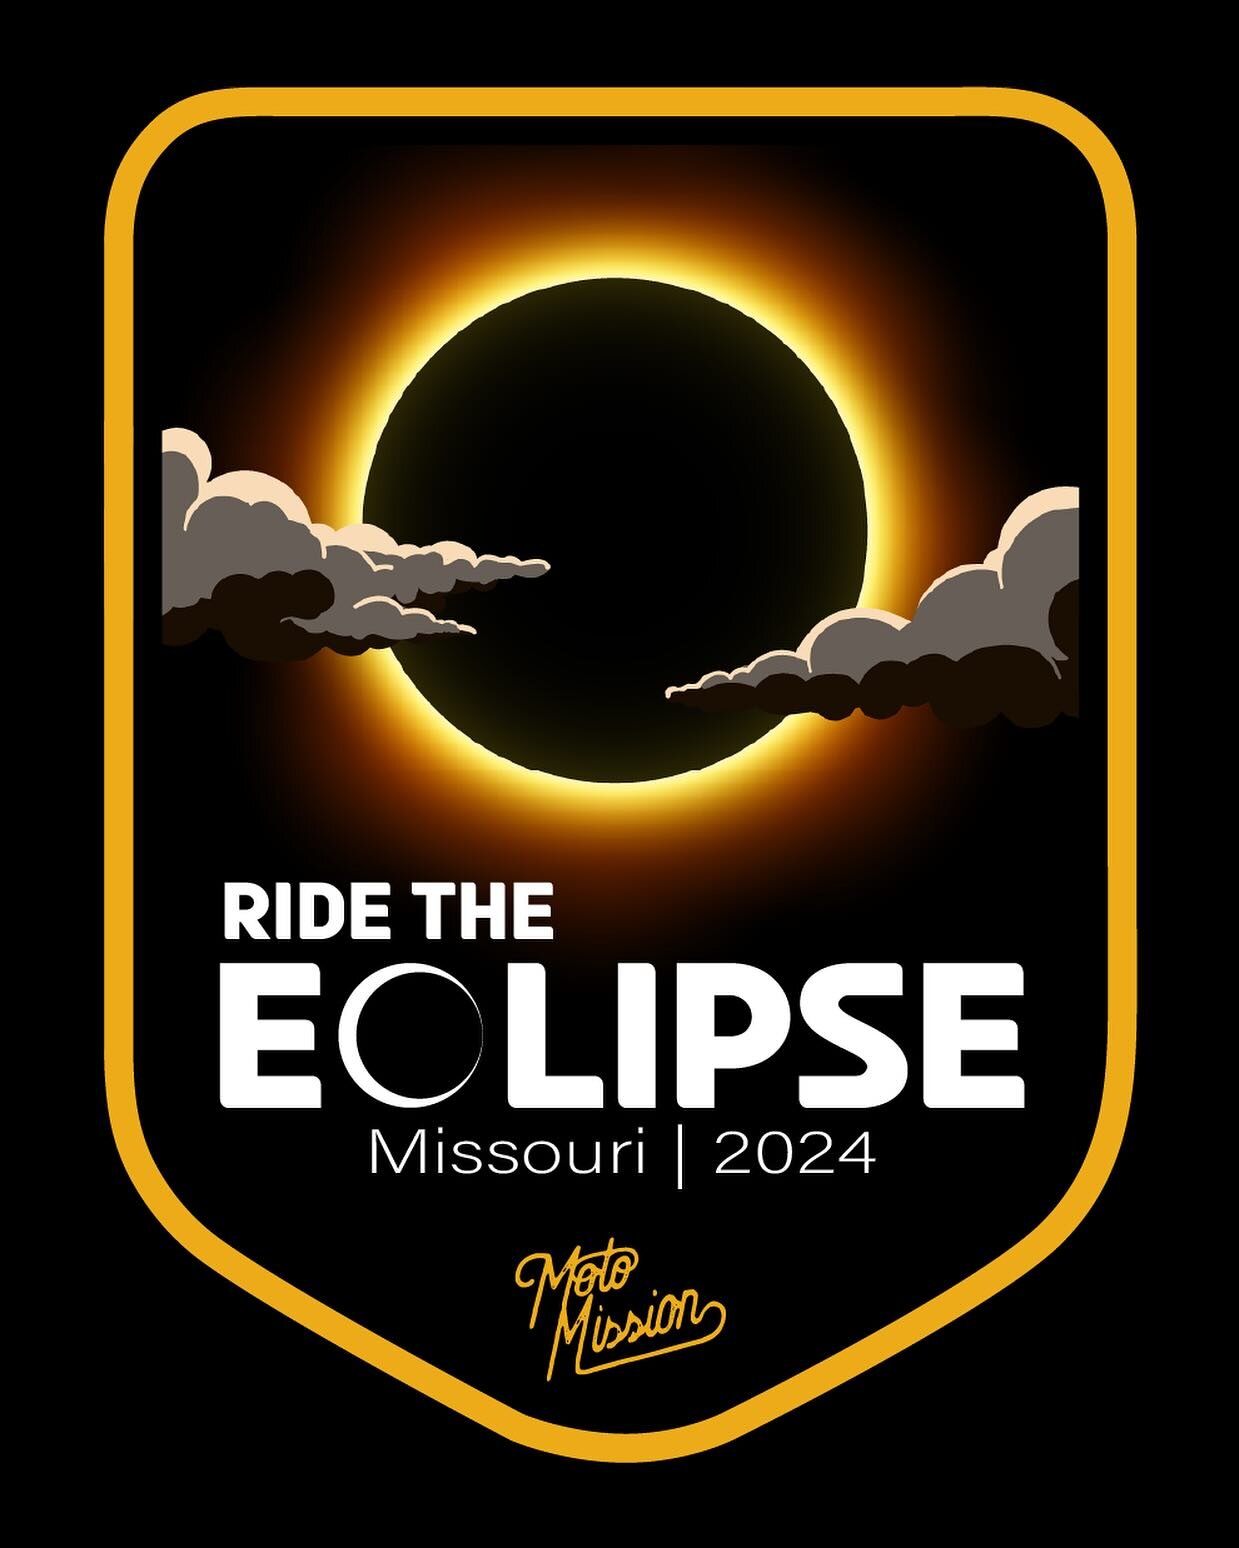 Join me in Arkansas and Missouri for the eclipse ride. April 8. This will be in the path of totality.  Dm for details